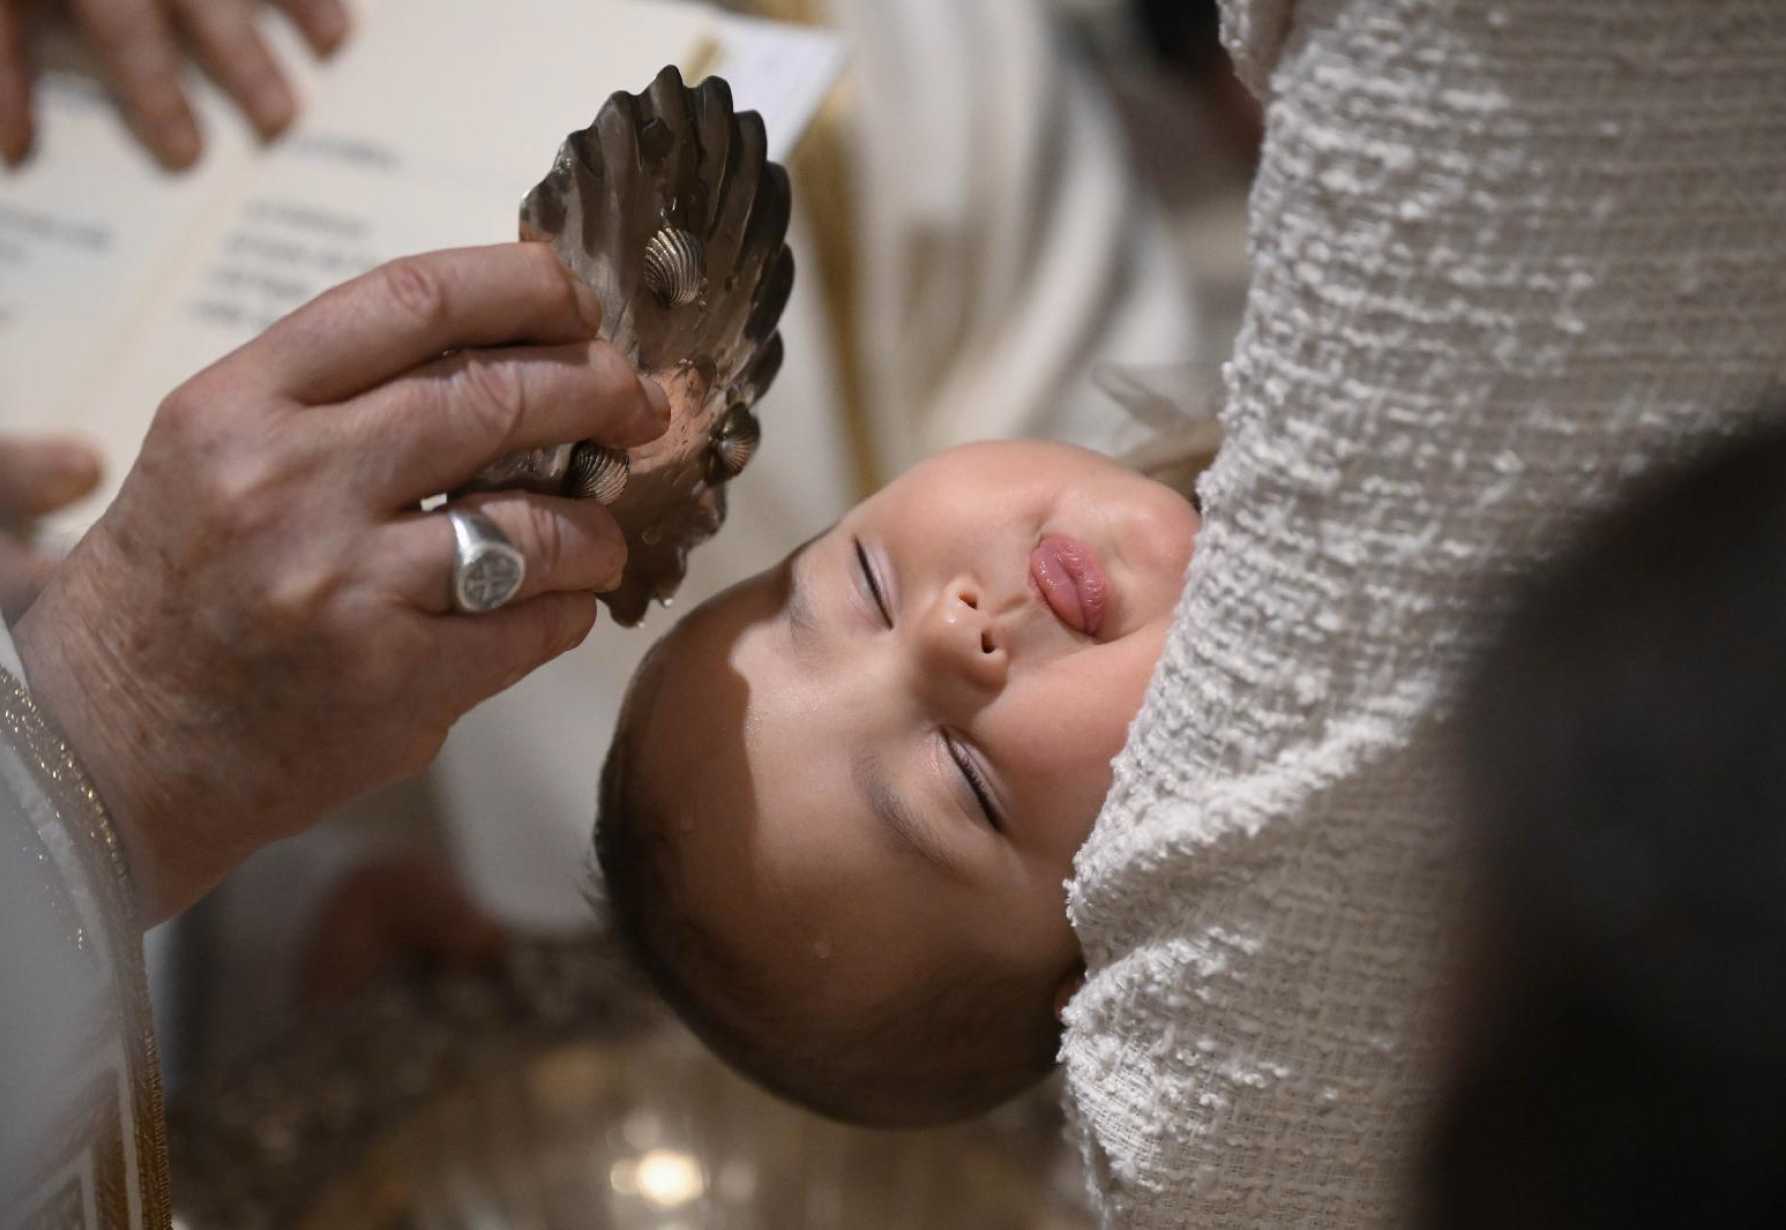 Faith is a gift to celebrate, pope says as he baptizes babies